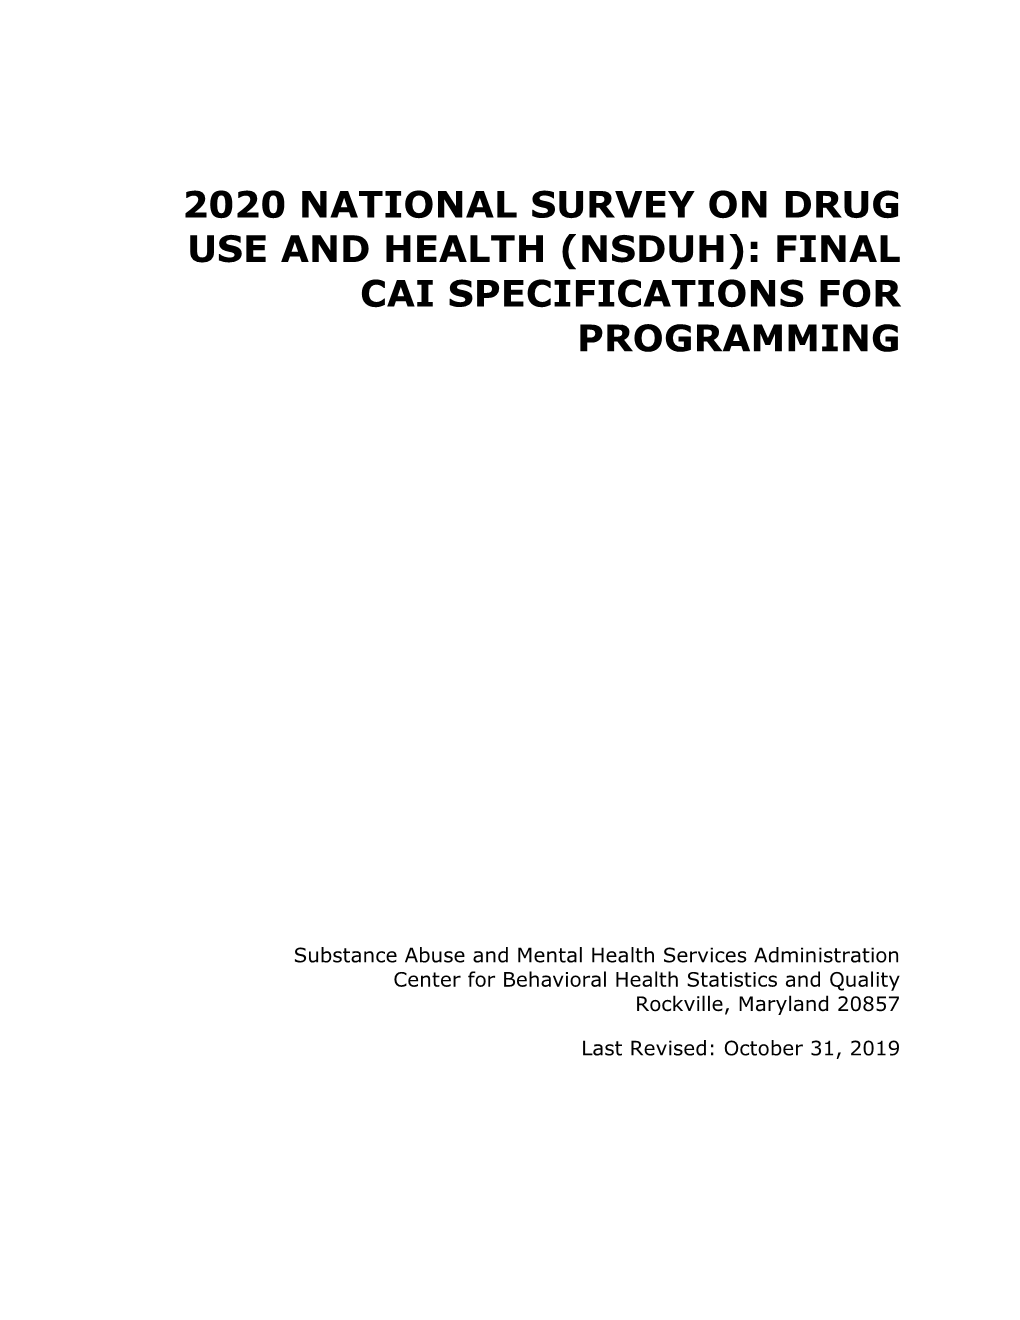 2020 NSDUH Final CAI Specifications for Programming